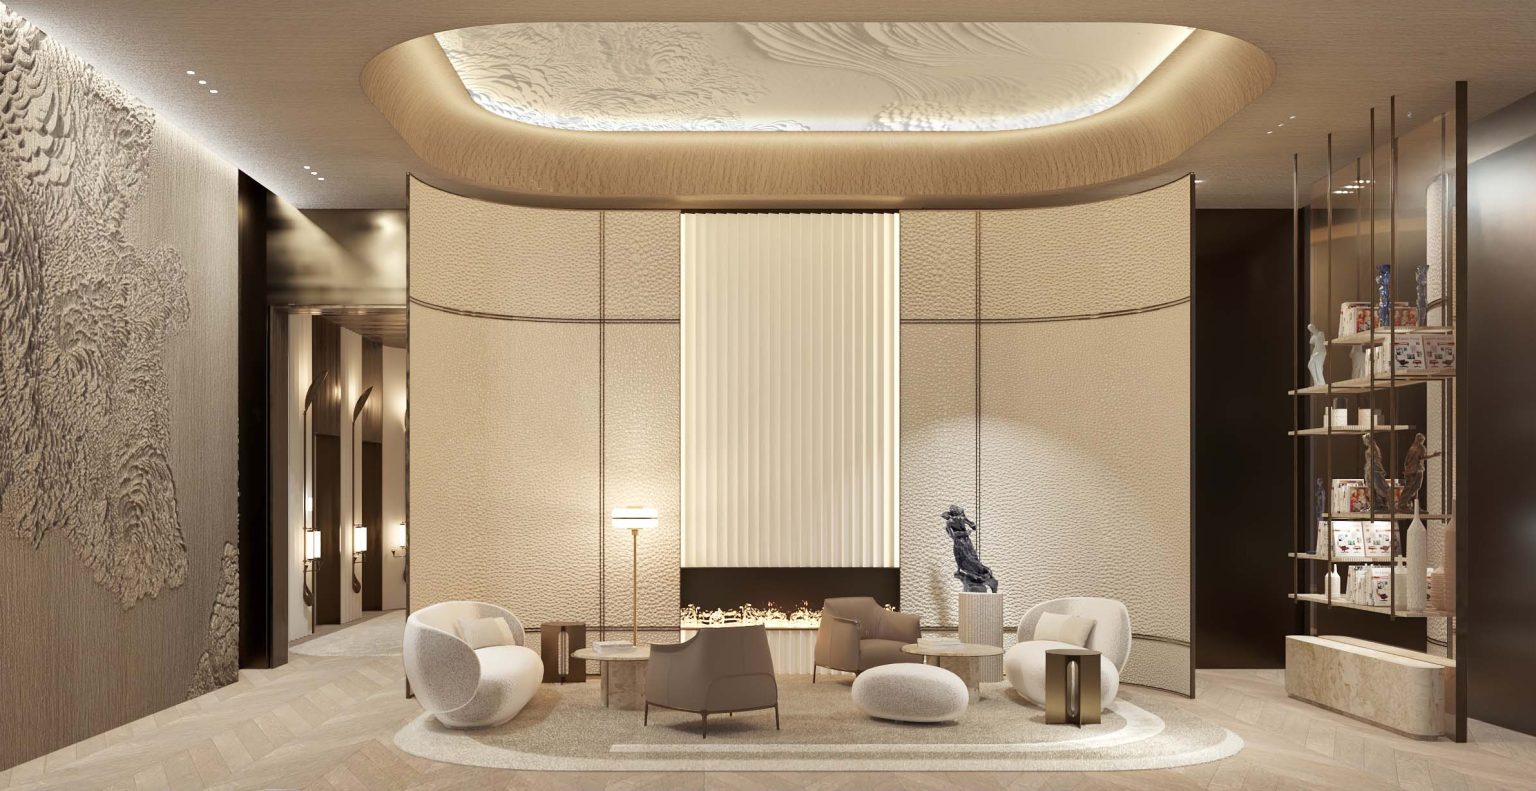 The Ritz-Carlton Residences, Dubai, Business Bay will be available for purchase in 2025